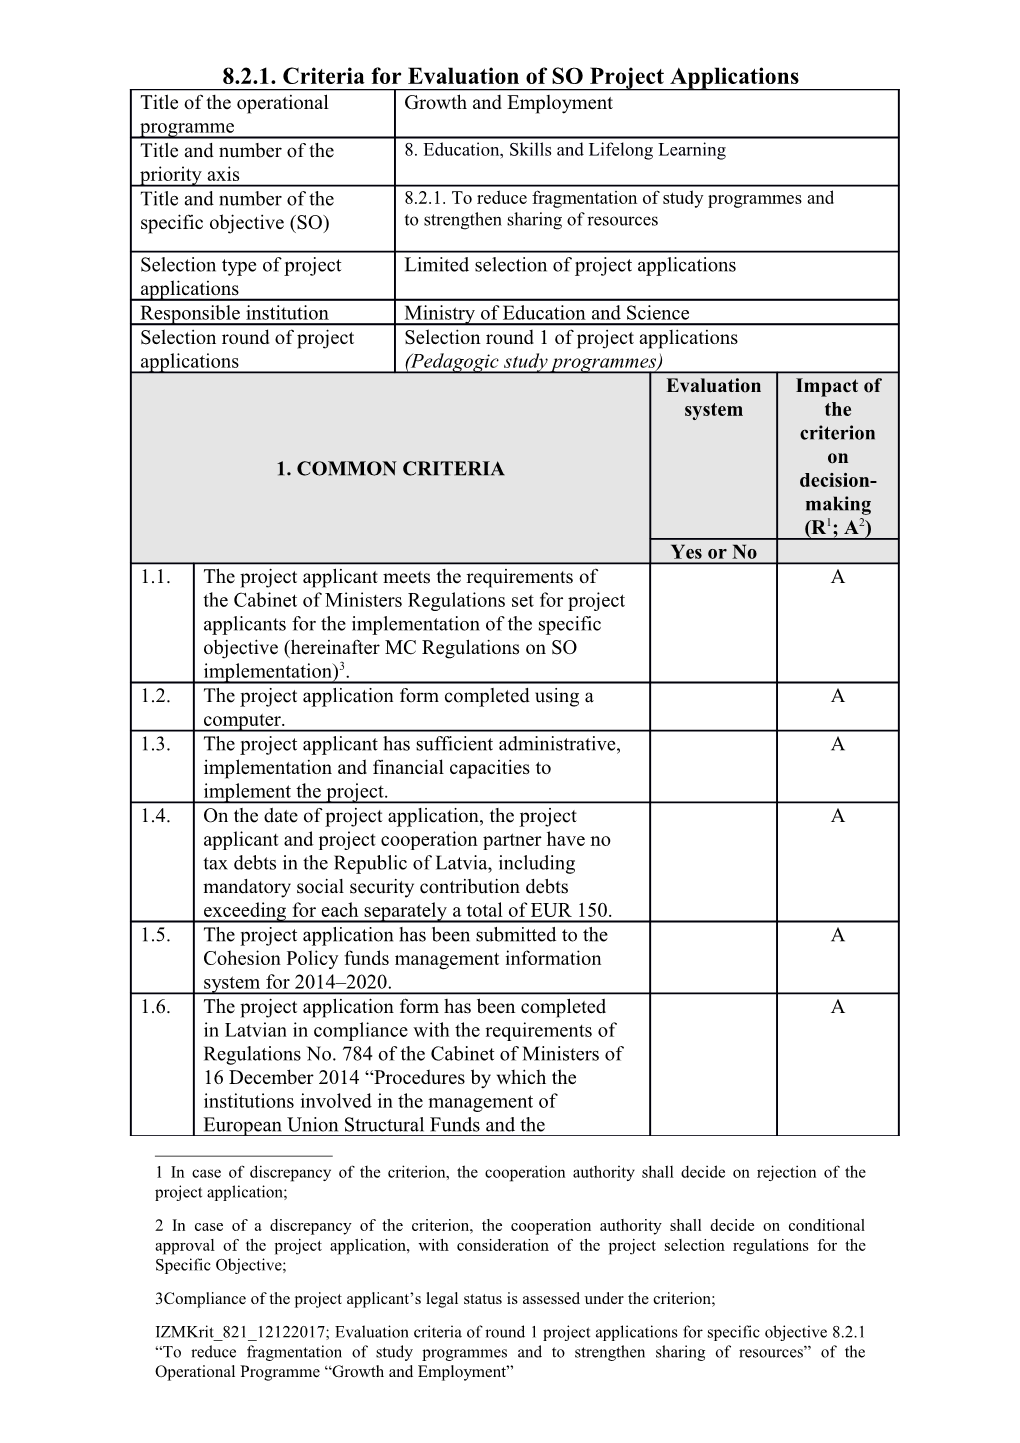 8.2.1. Criteria for Evaluation of SO Project Applications